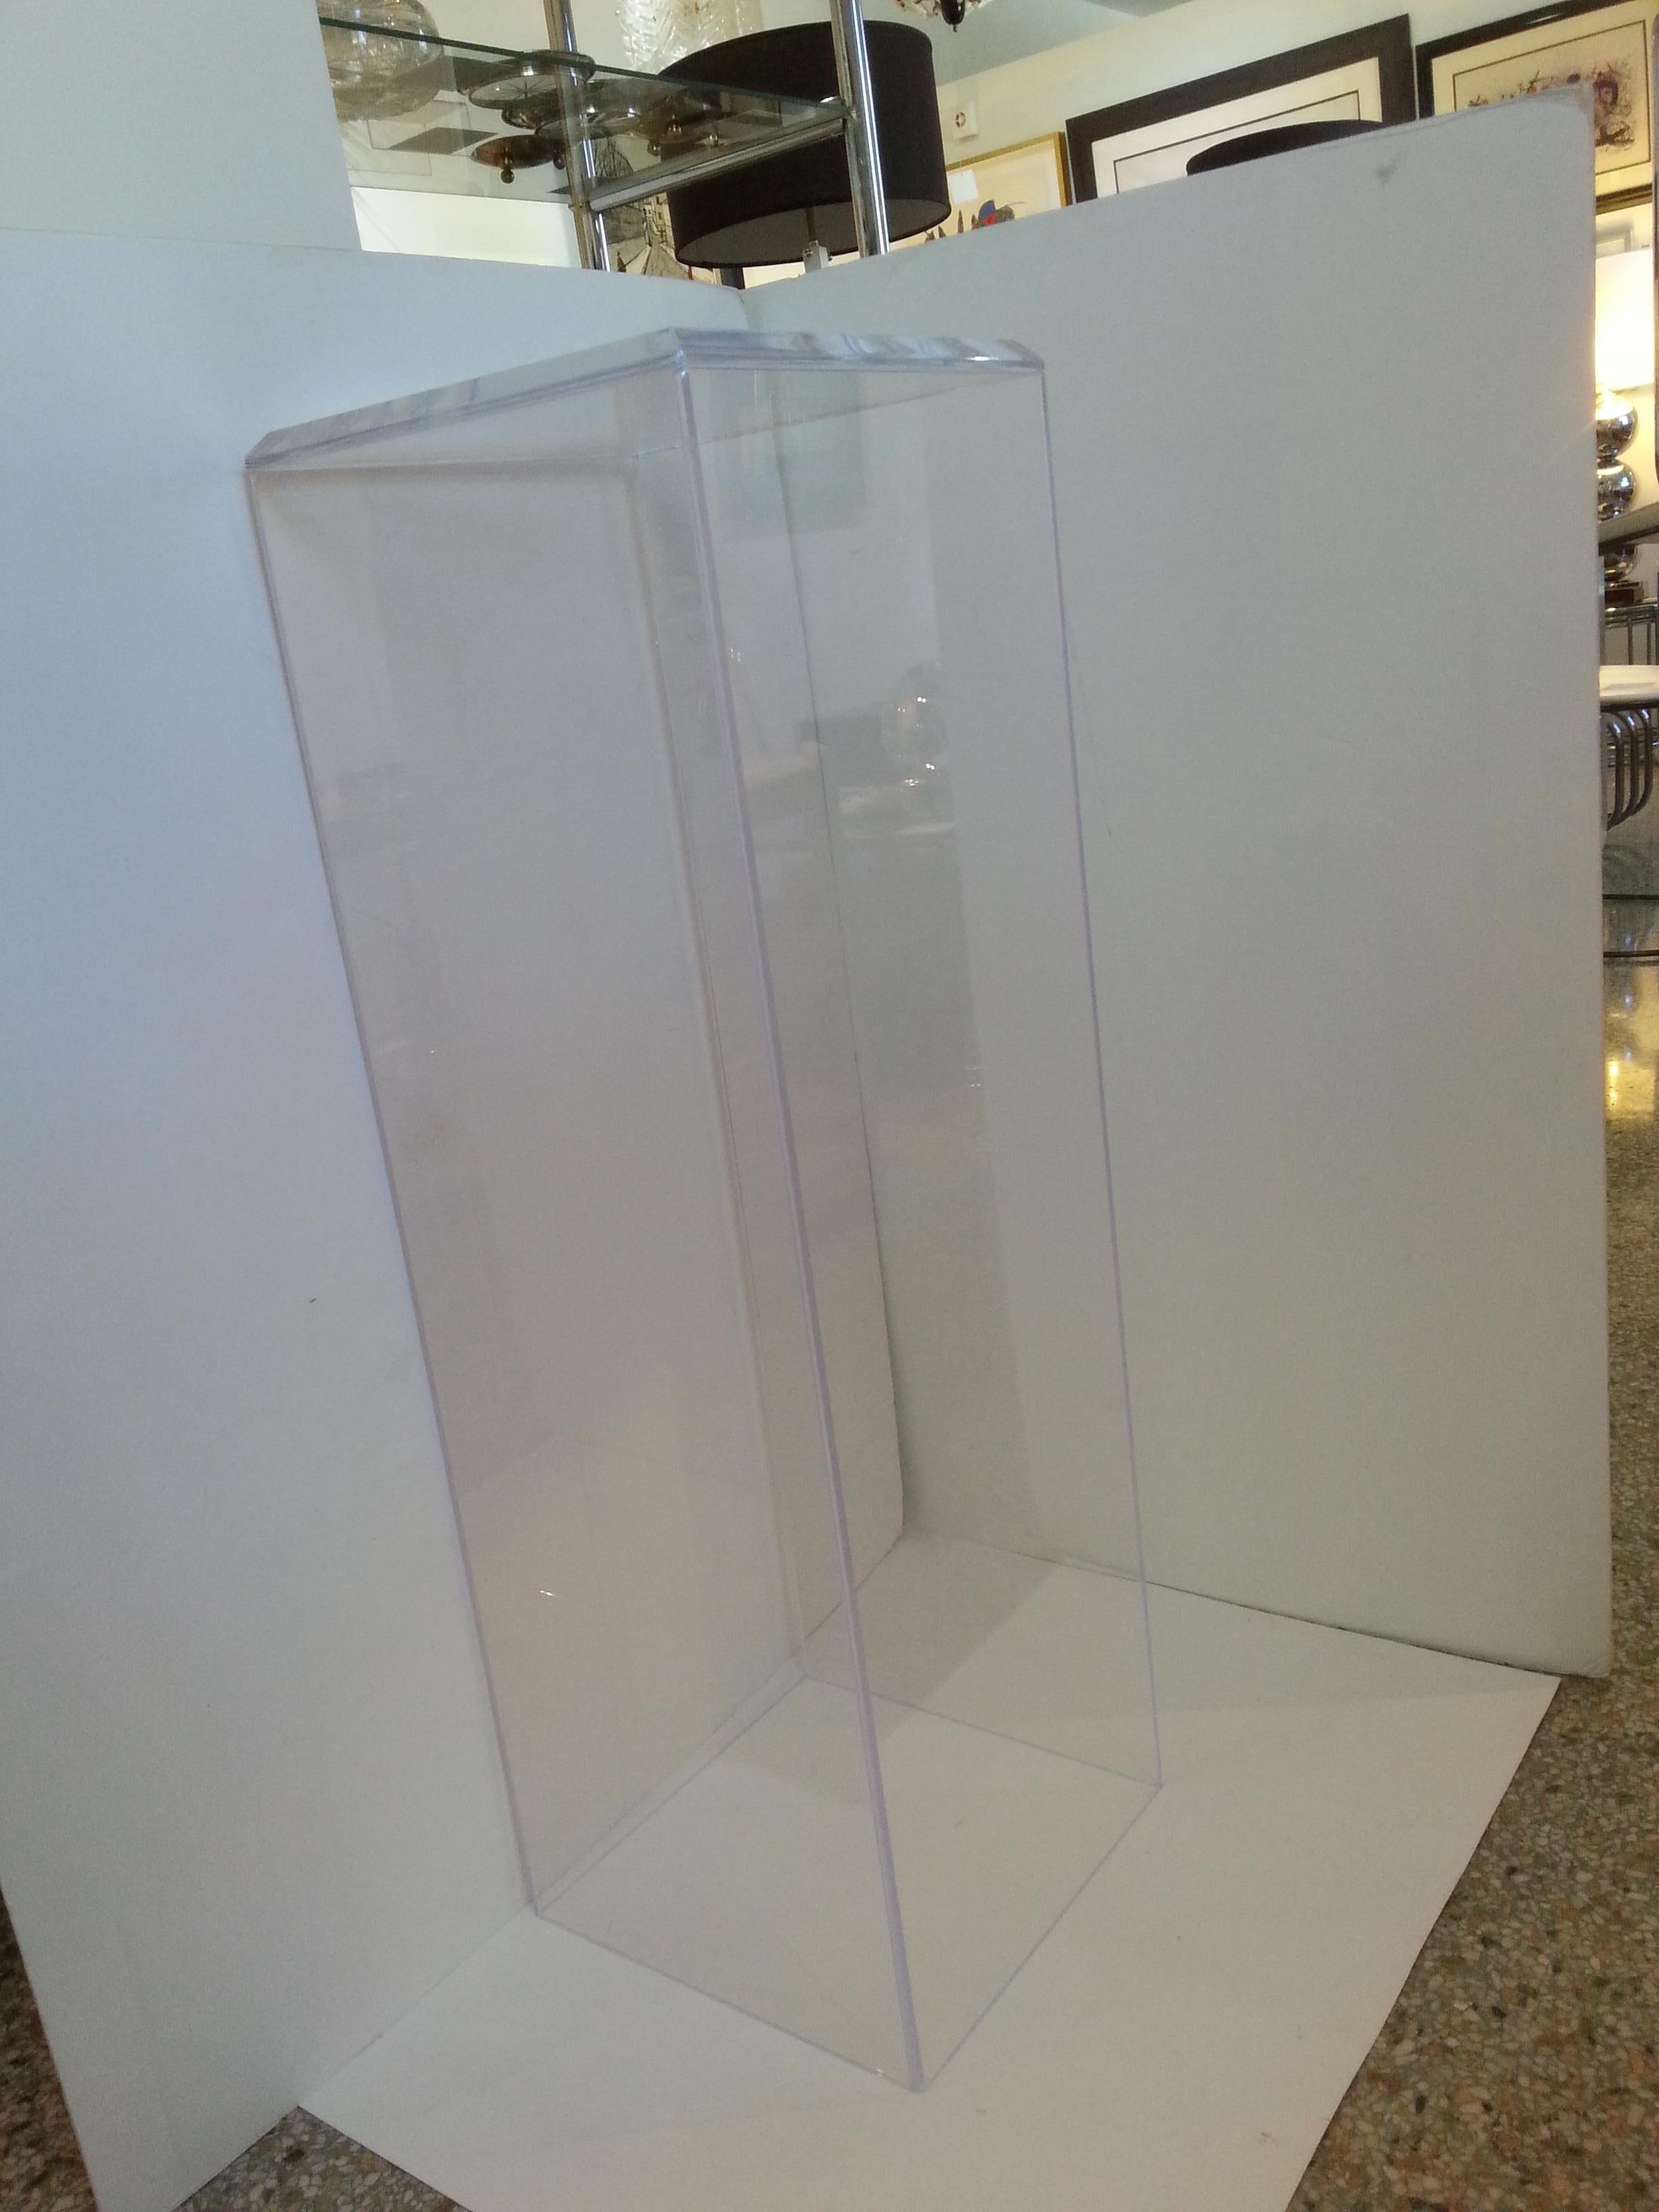 (One) Lucite Pedestal with a Beveled Edge 2